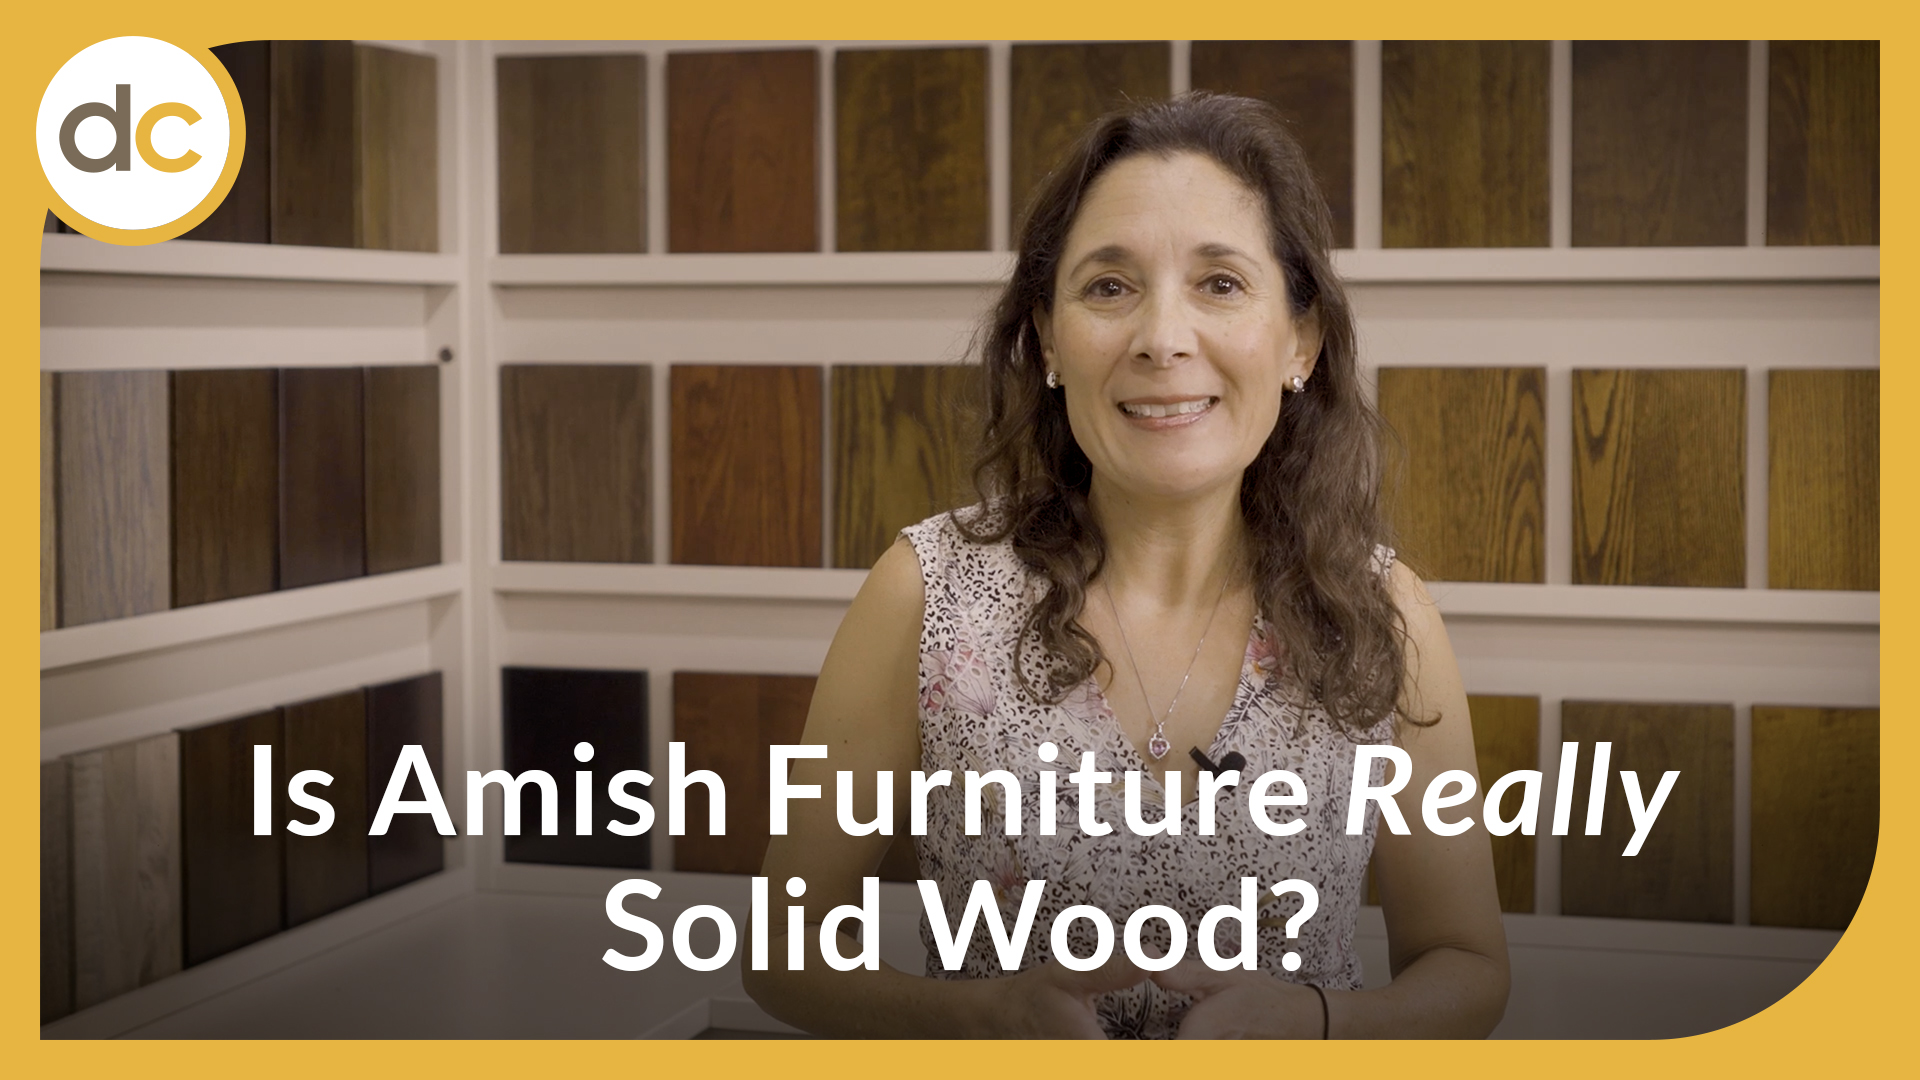 Video title image: Is Amish Furniture Really Solid Wood?